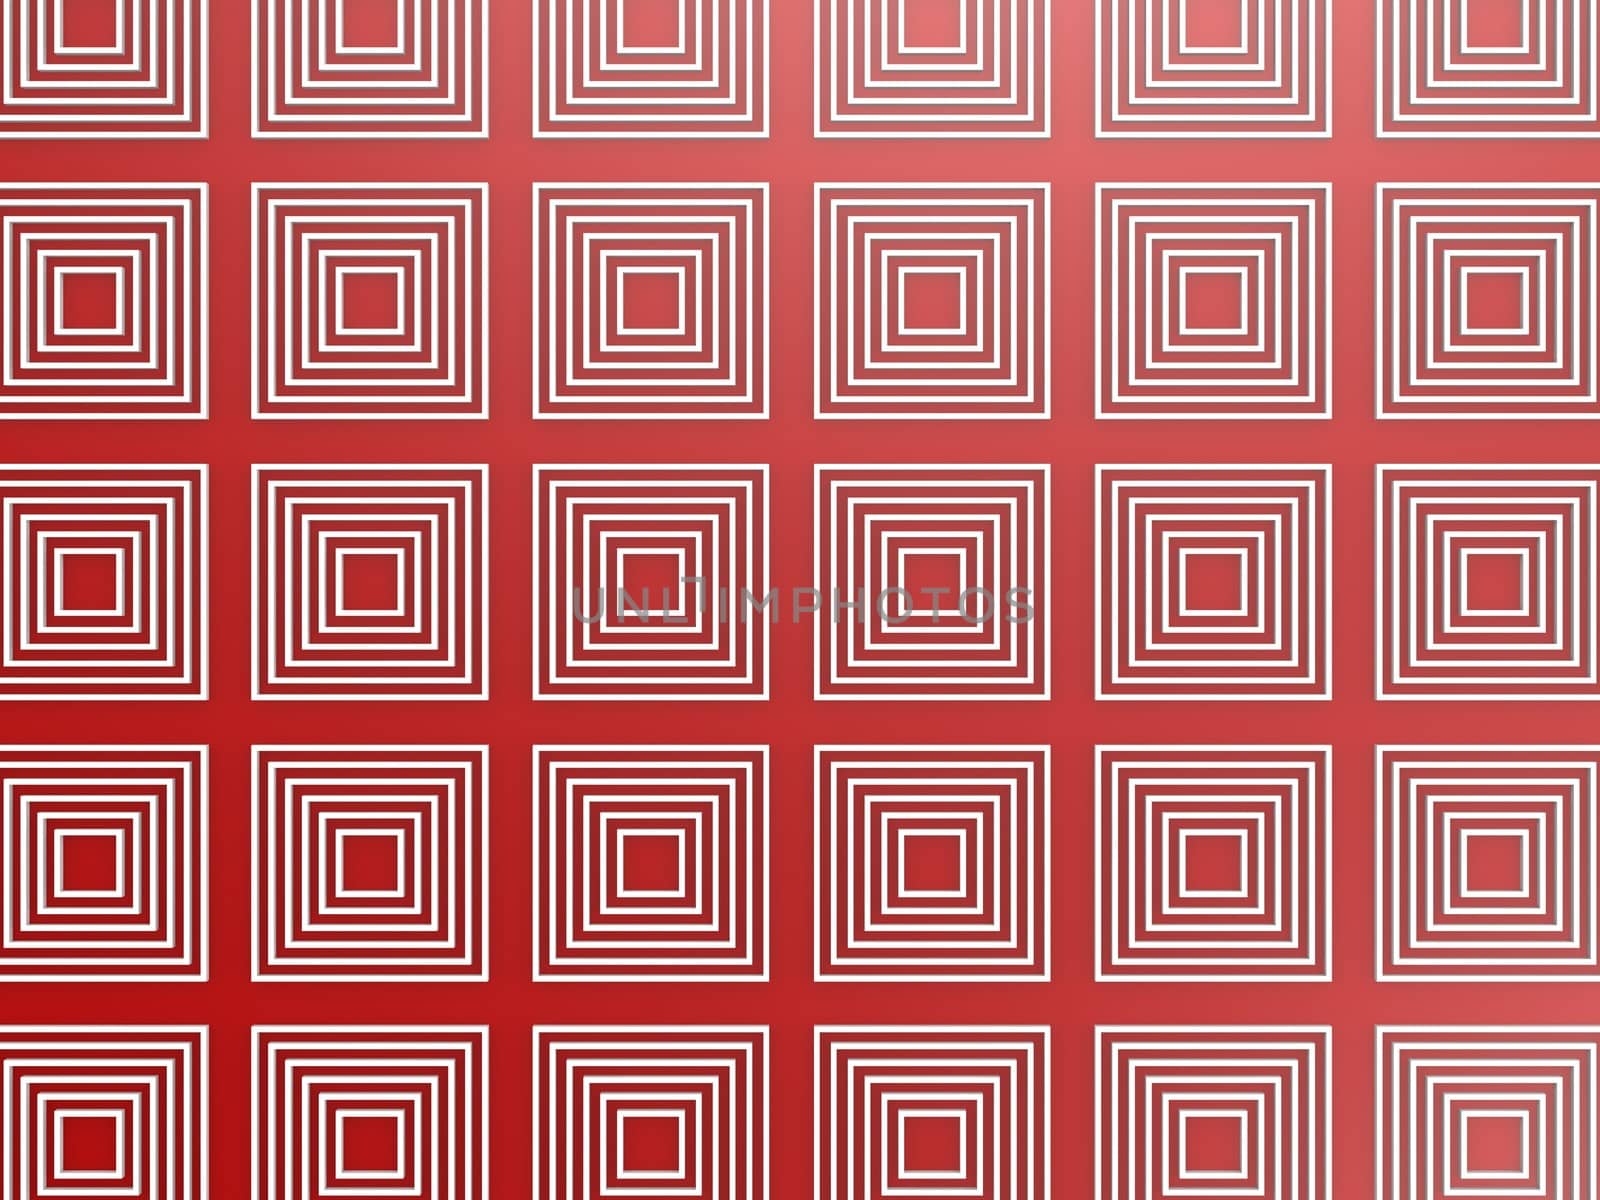 Red square pattern by tang90246